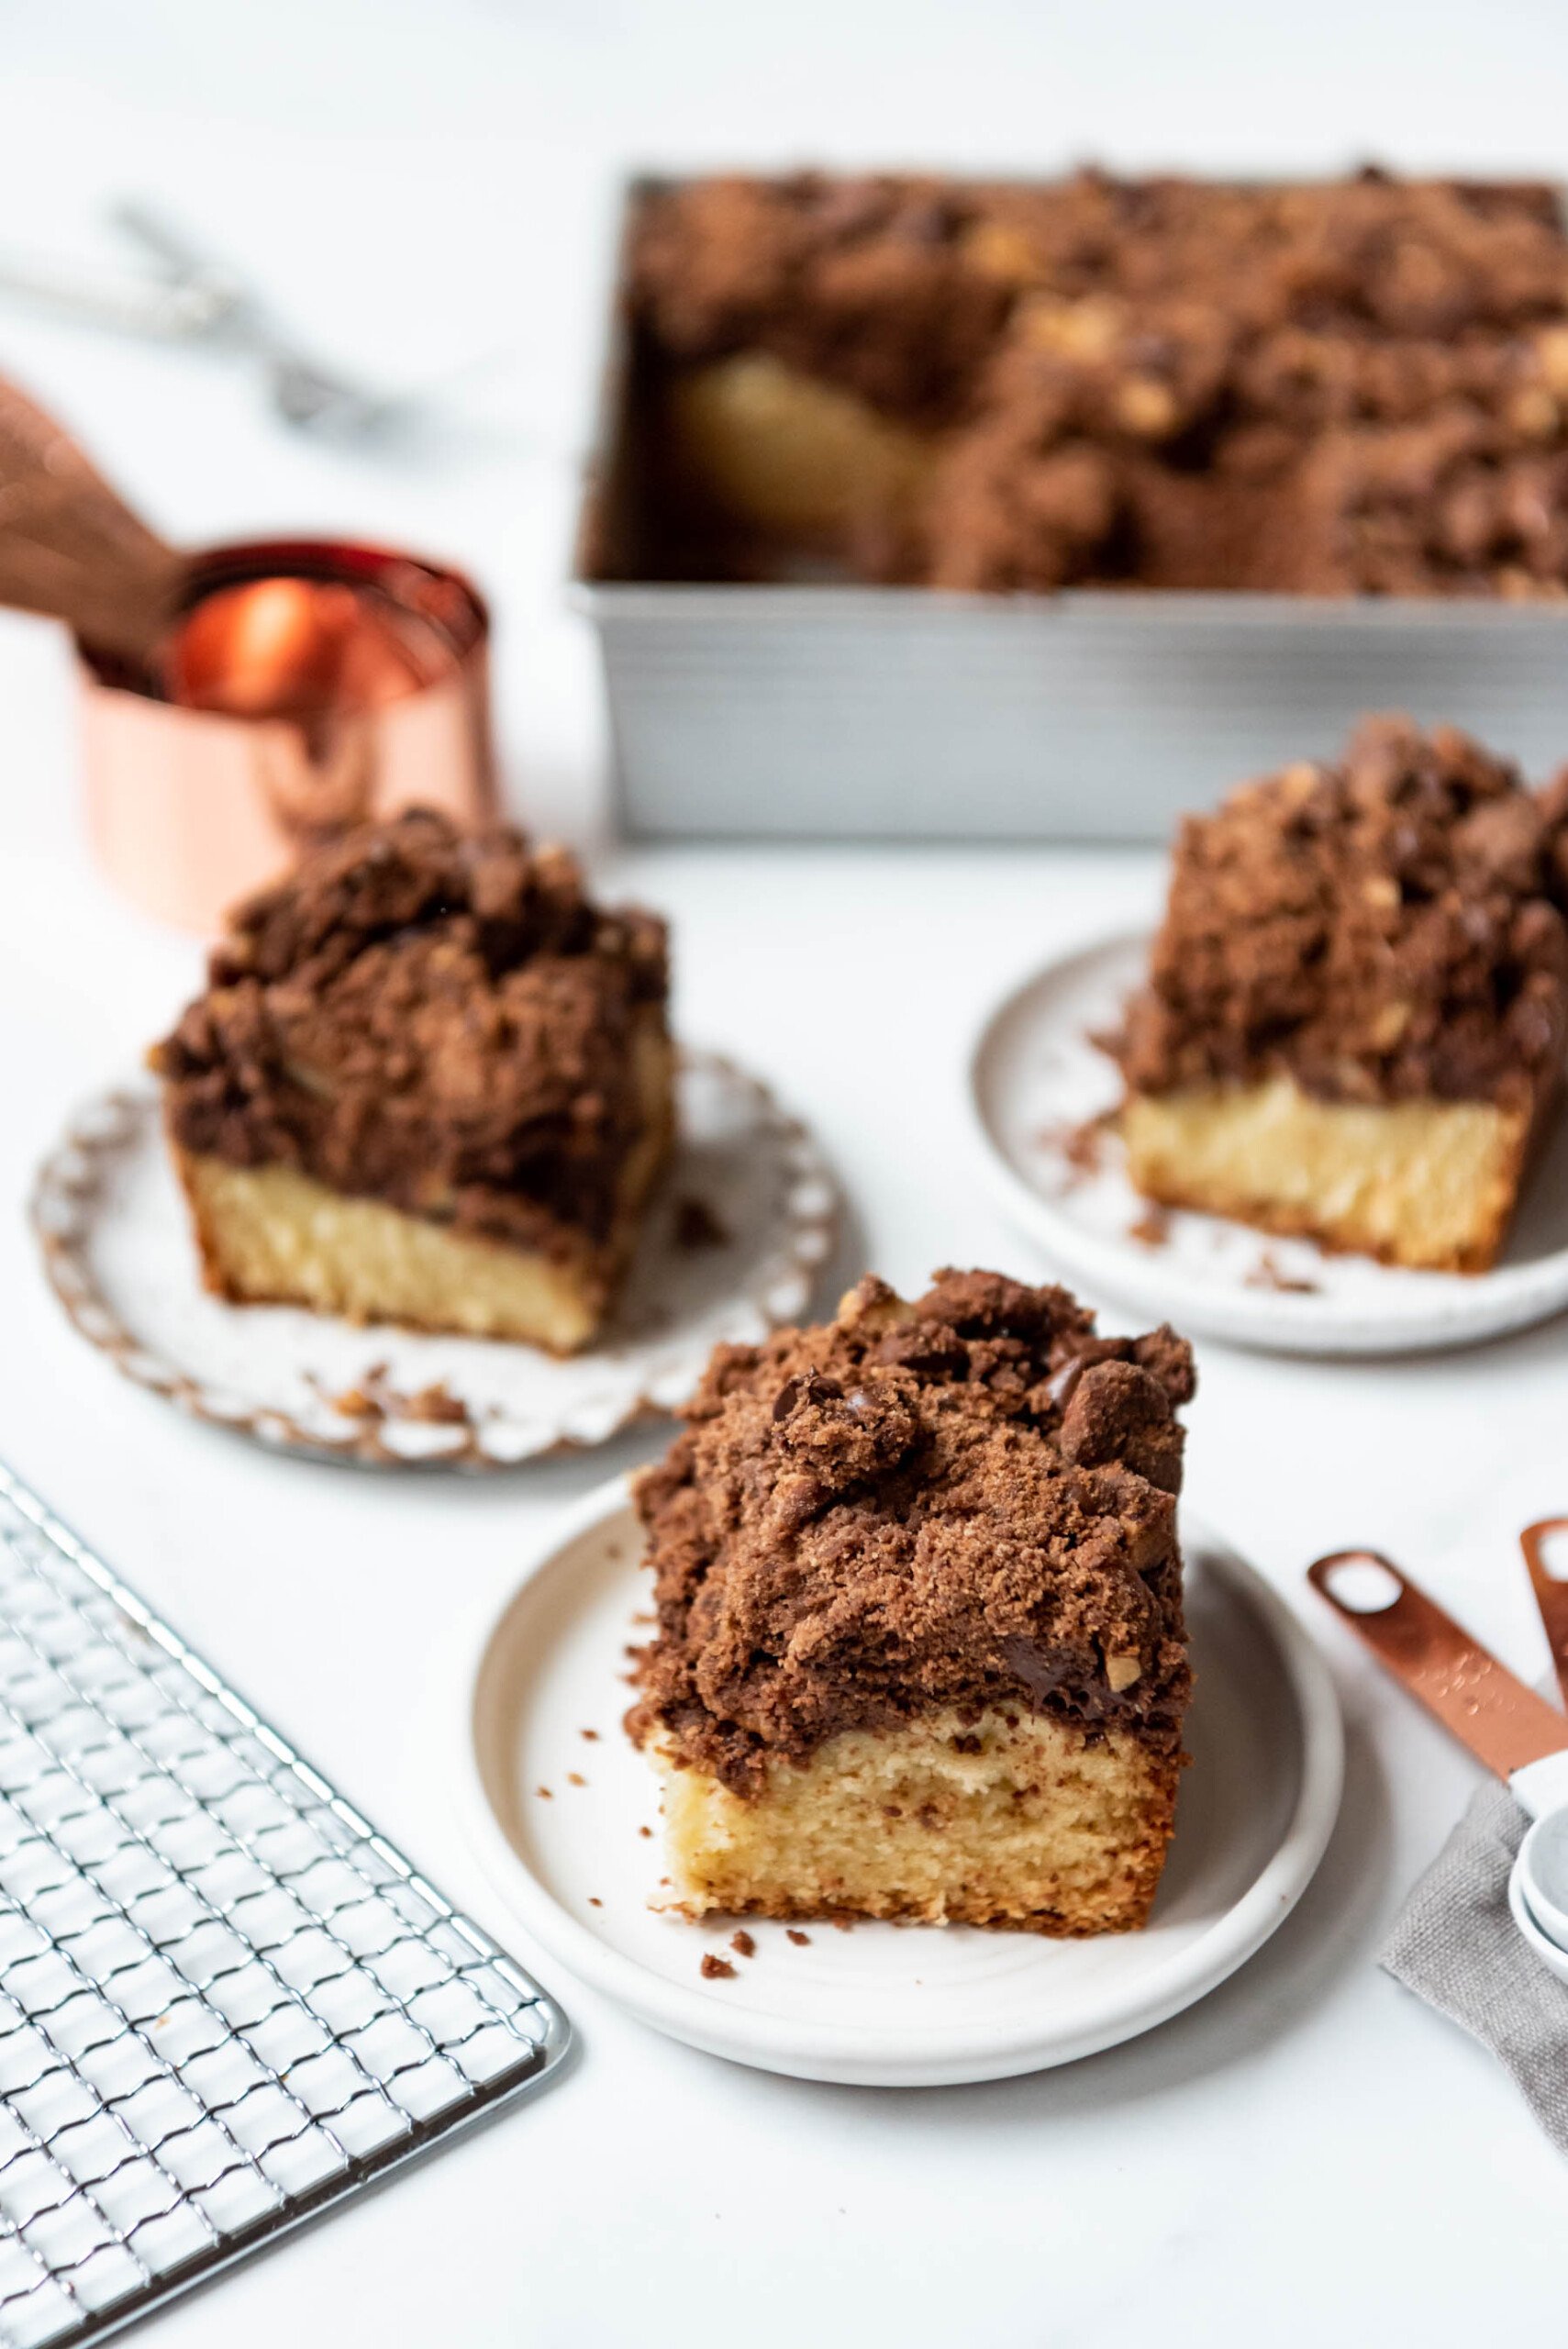 Slices of chocolate pecan crumb cake on small plates in front of a baking dish and measuring cups.